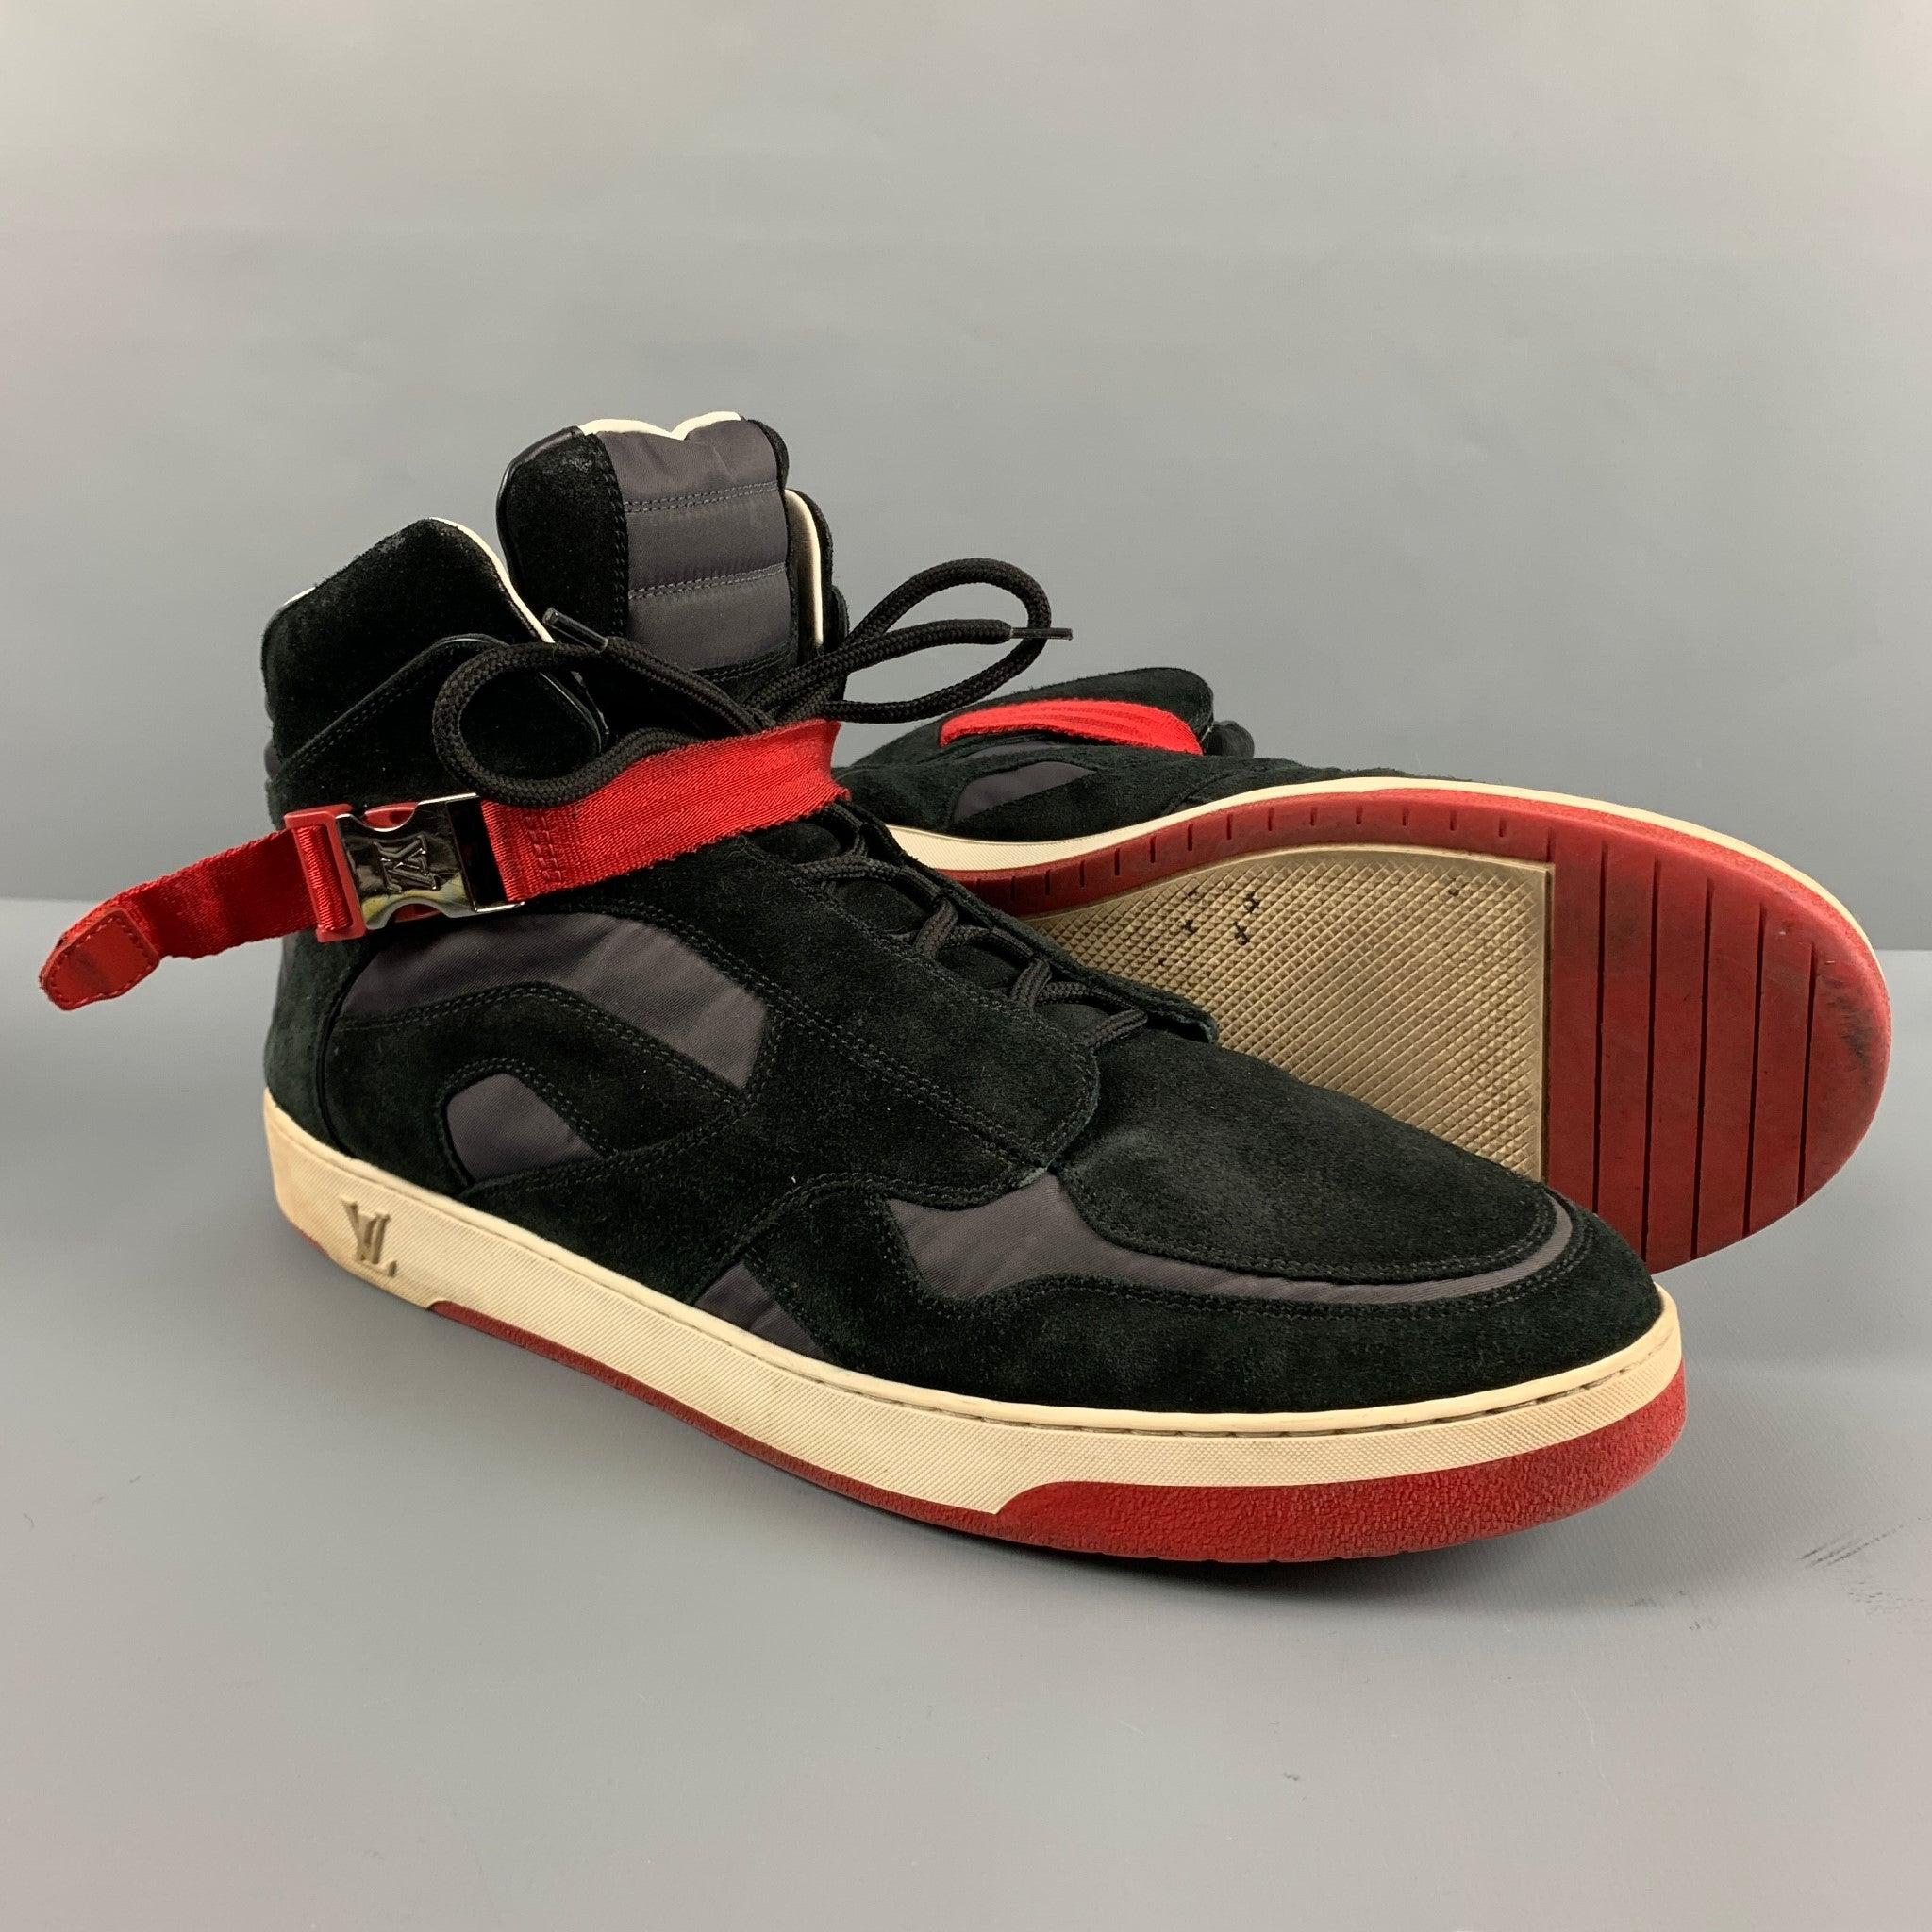 LOUIS VUITTON Size 13 Black Red  Nylon Suede High Top Sneakers For Sale 1